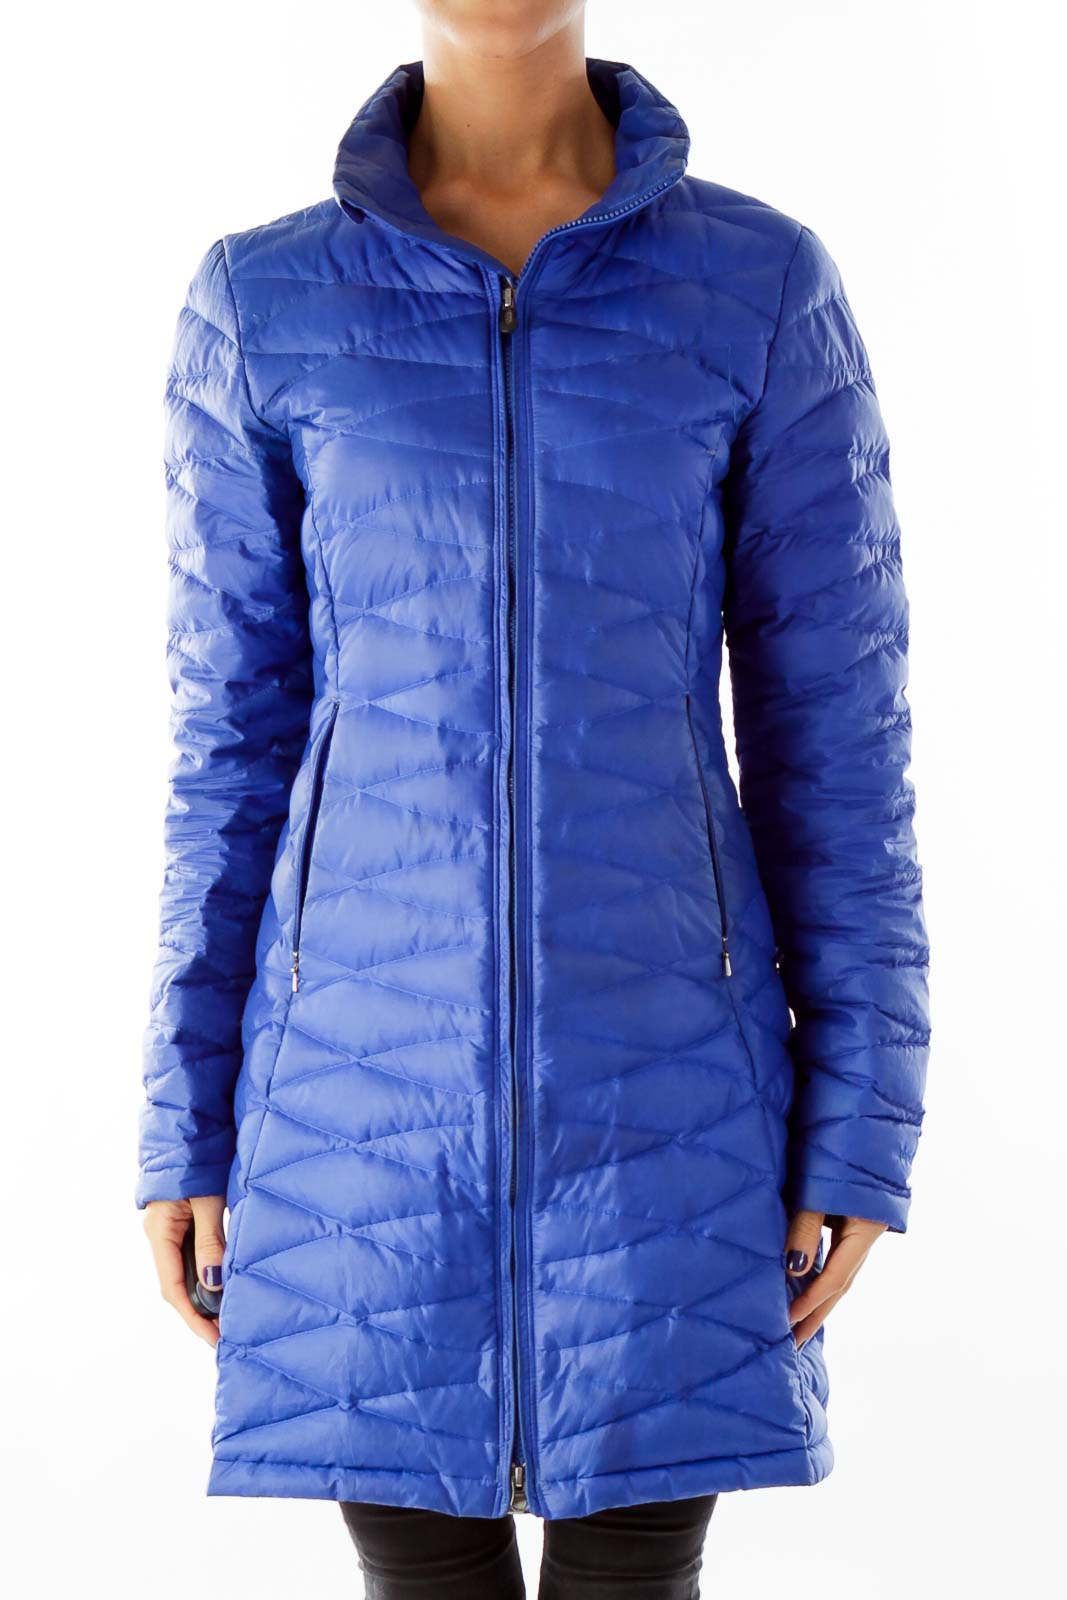 Blue Puffy Sport Jacket Front